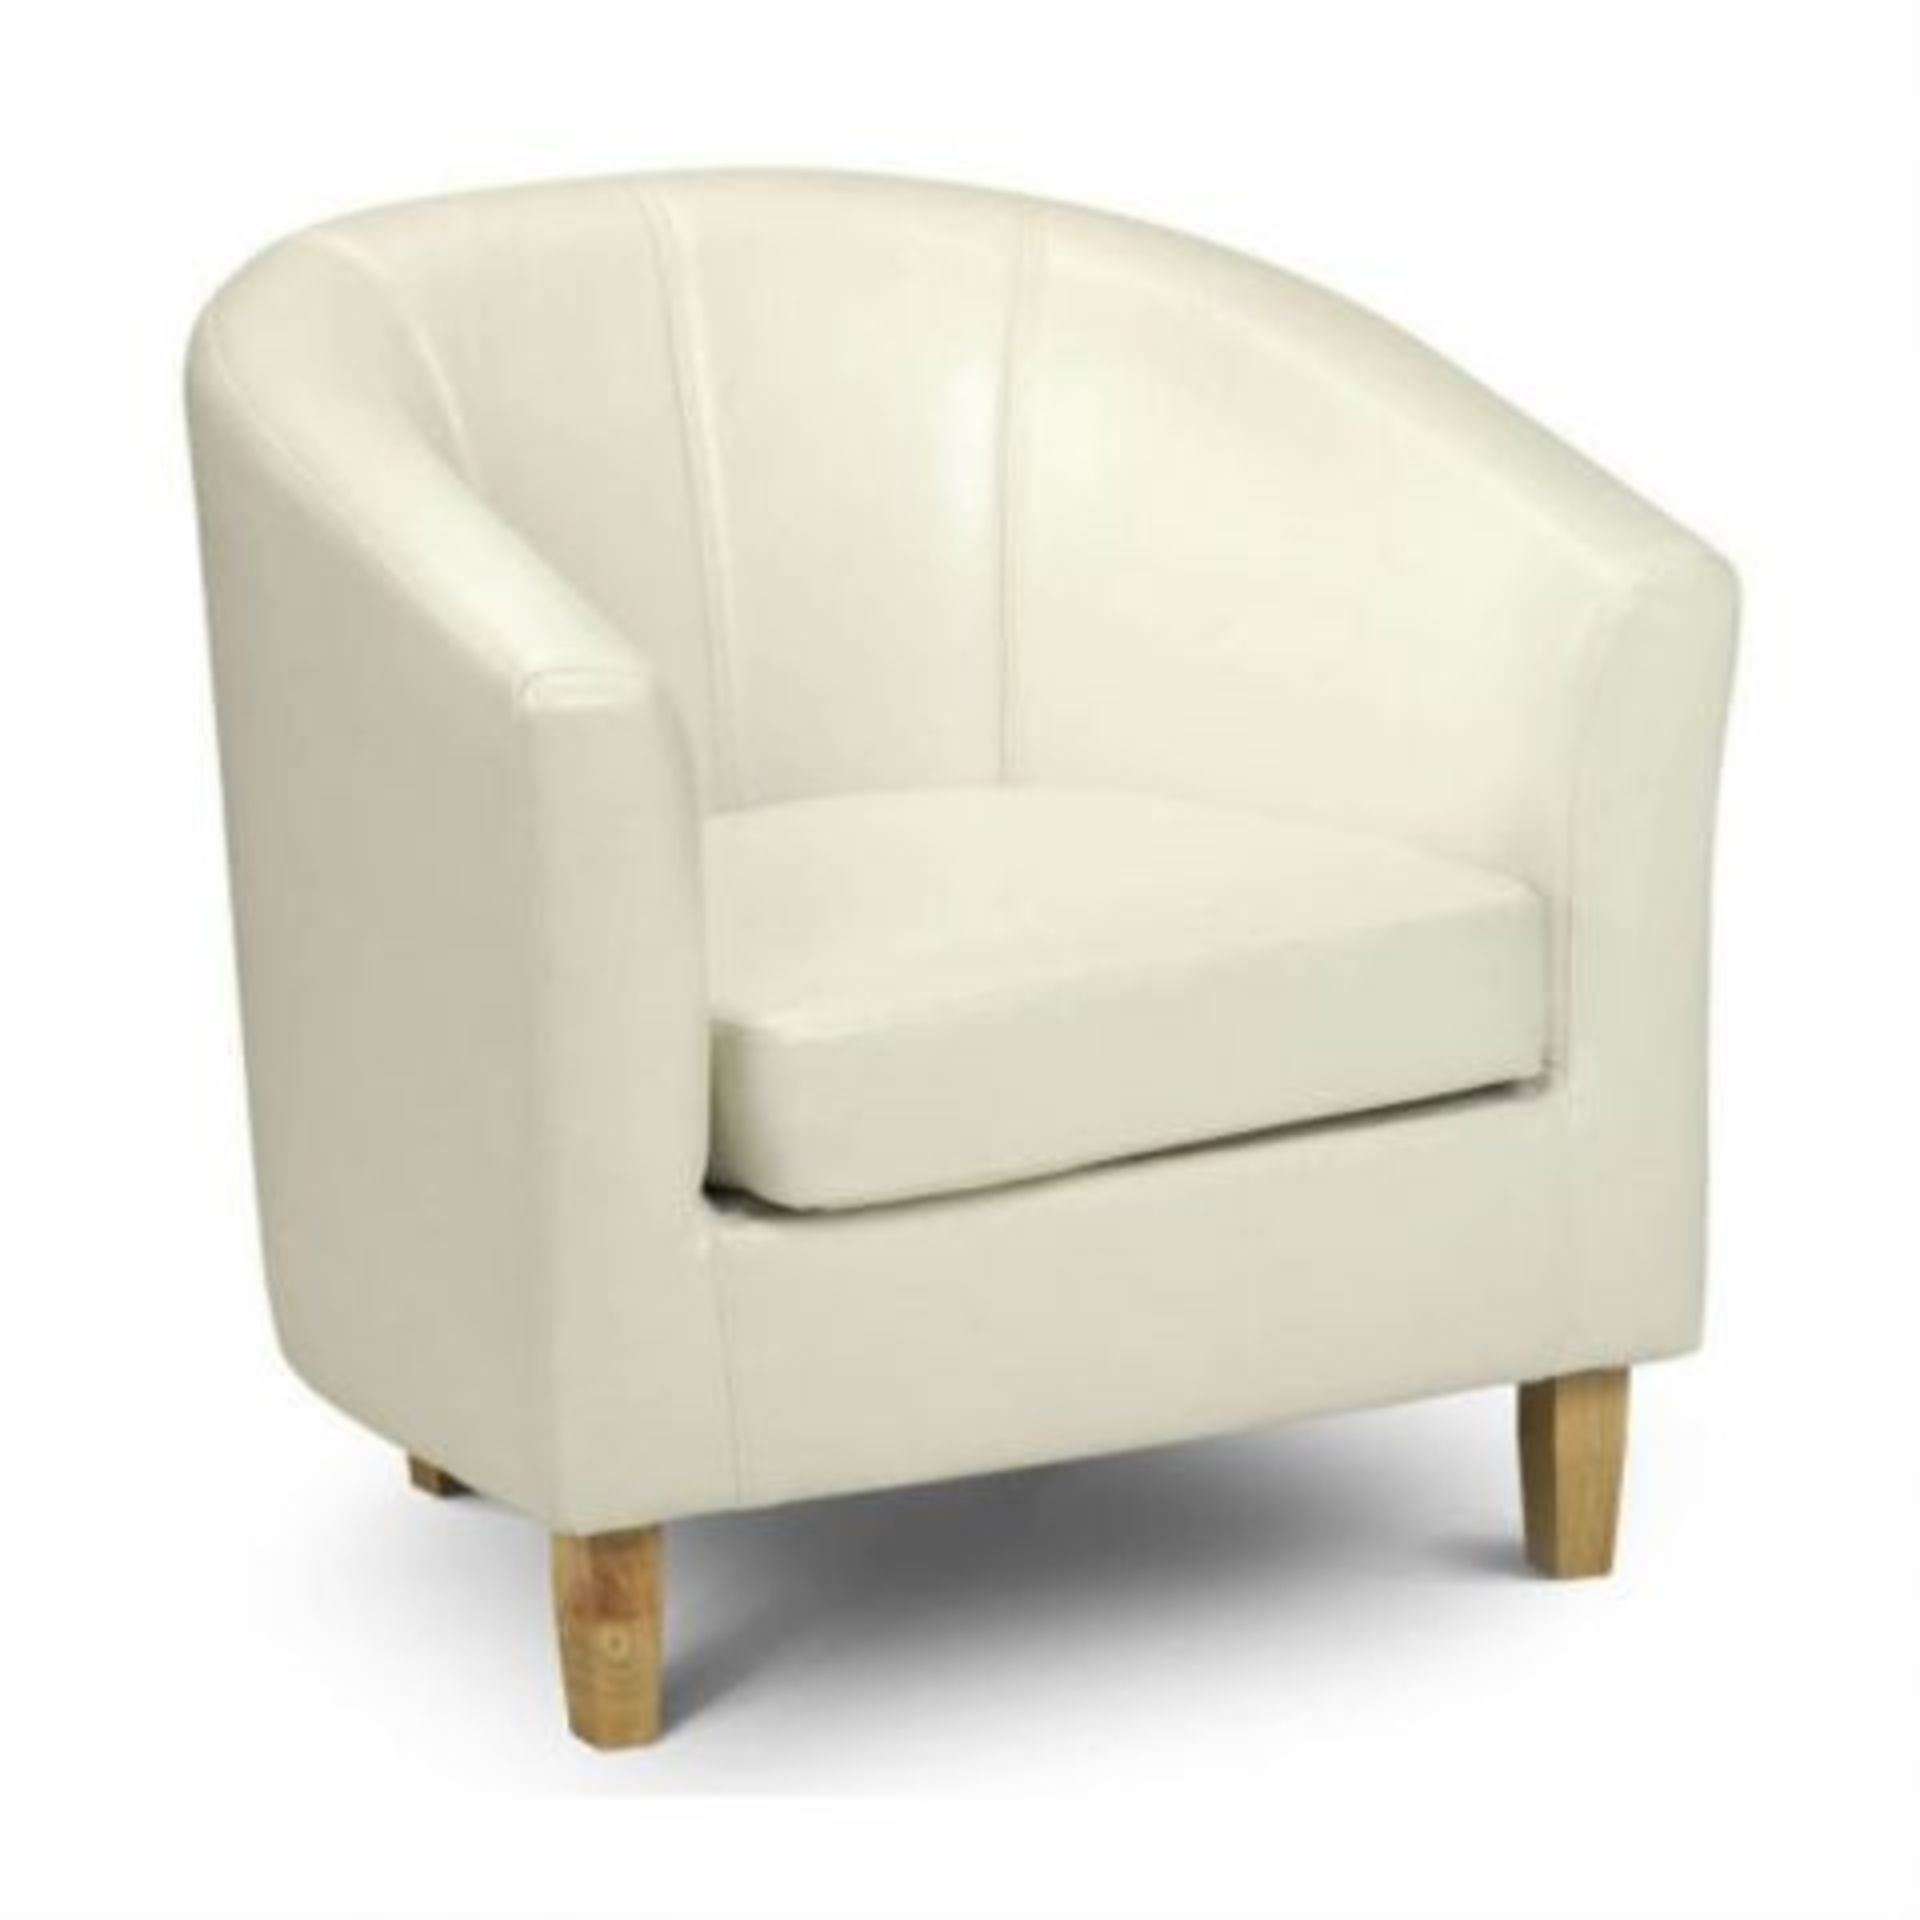 Cream faux leather tub chair with dark brown wooden legs